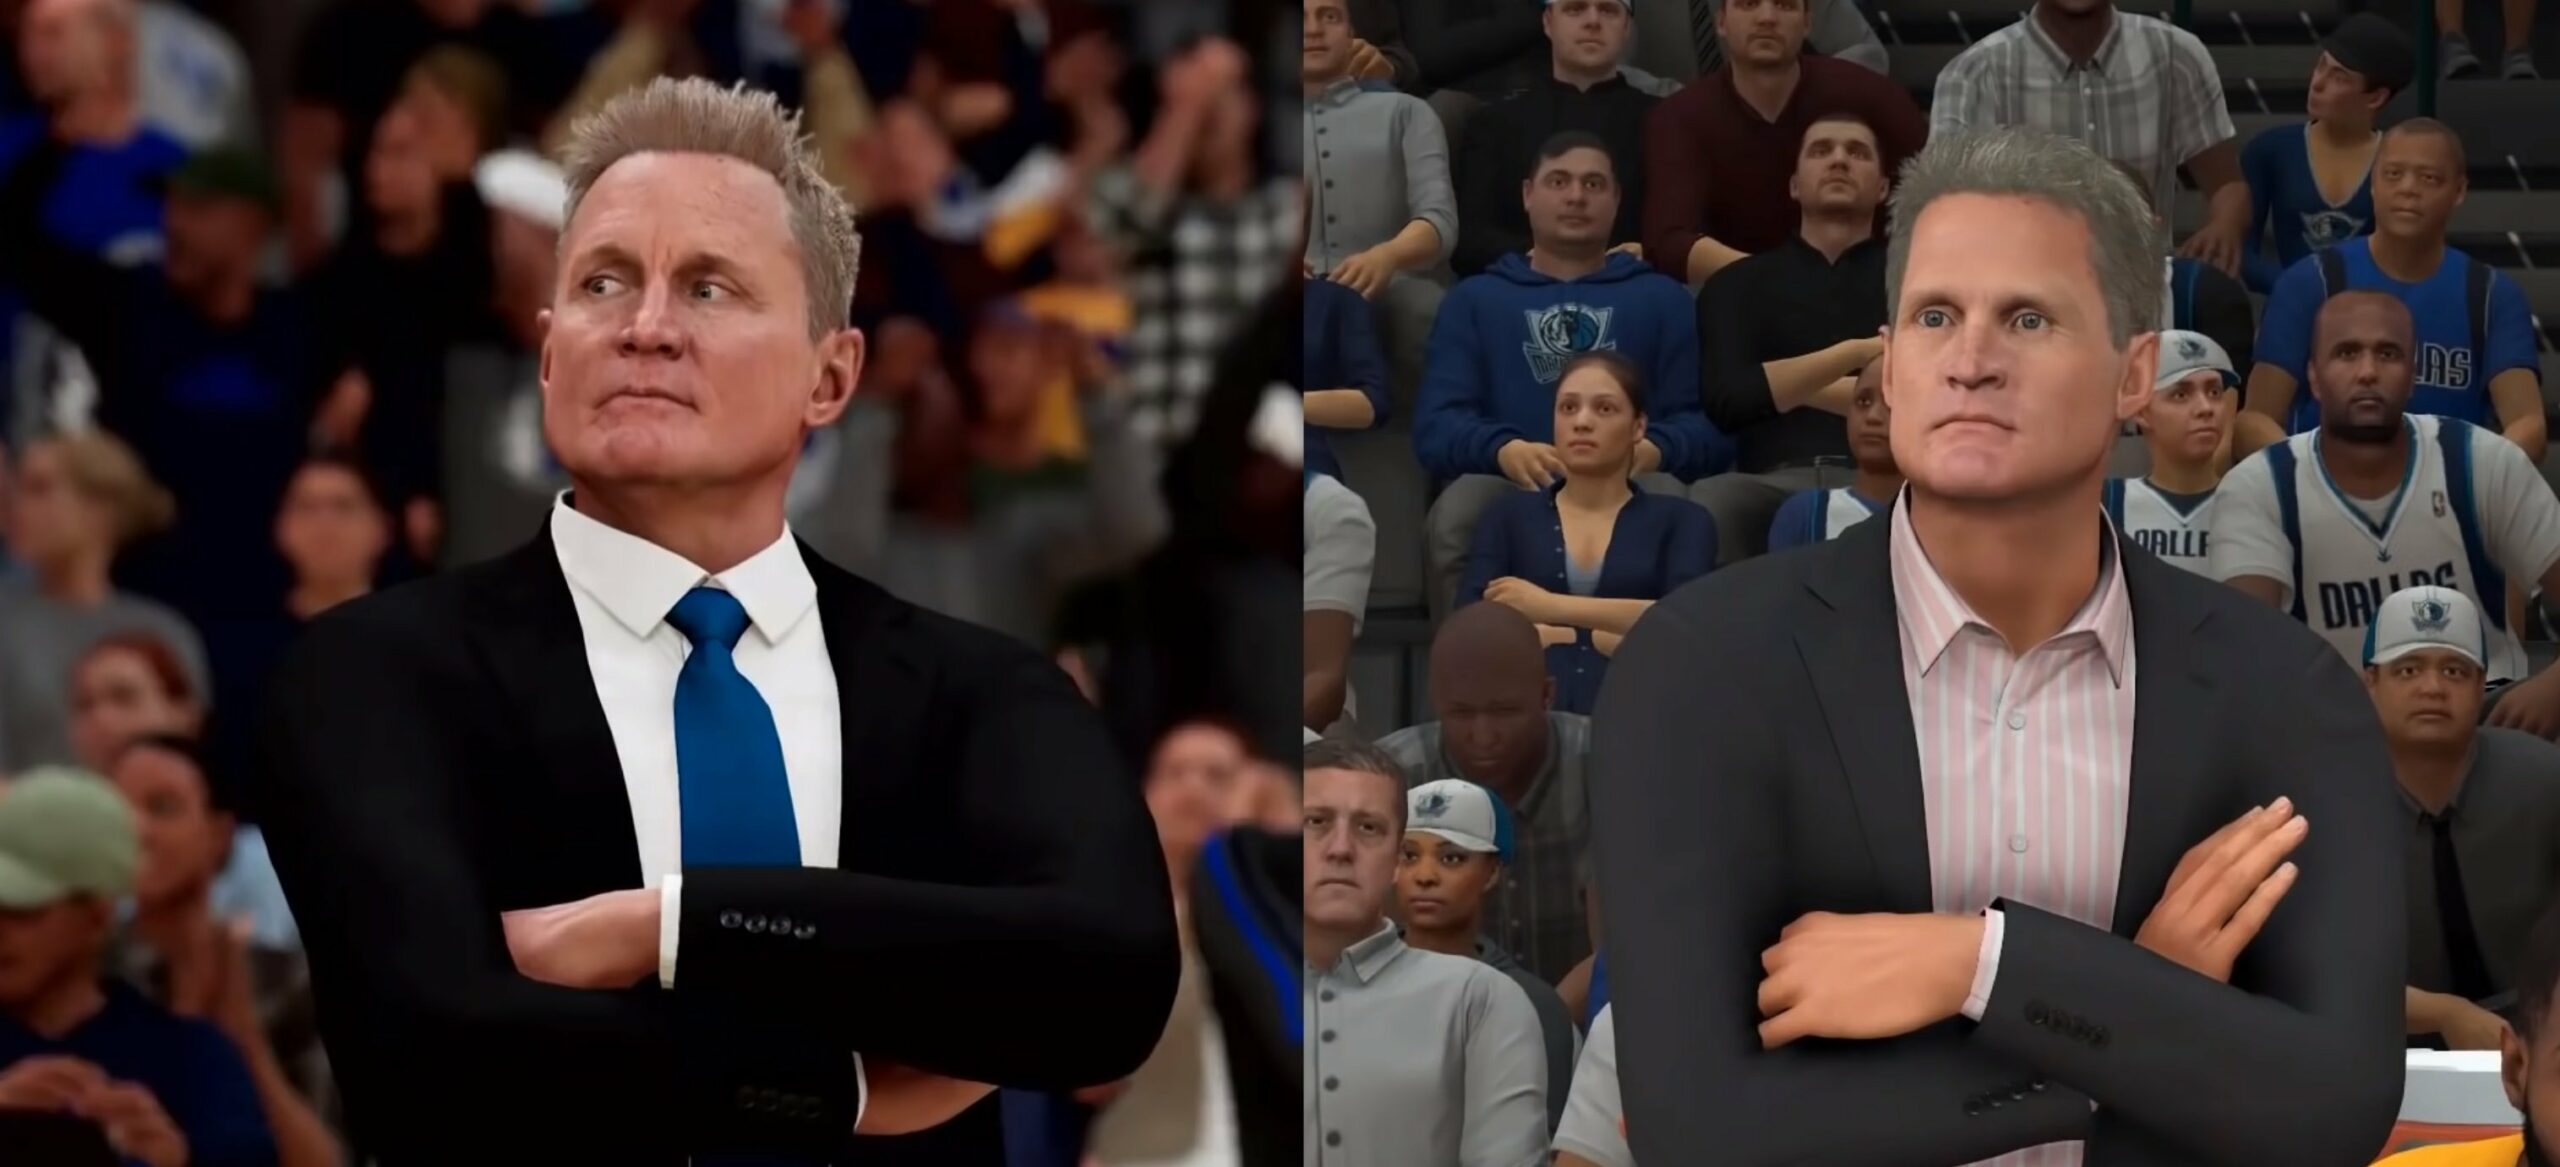 NBA 2K21 next-gen impressions: How big is the upgrade from PS4 to PS5?